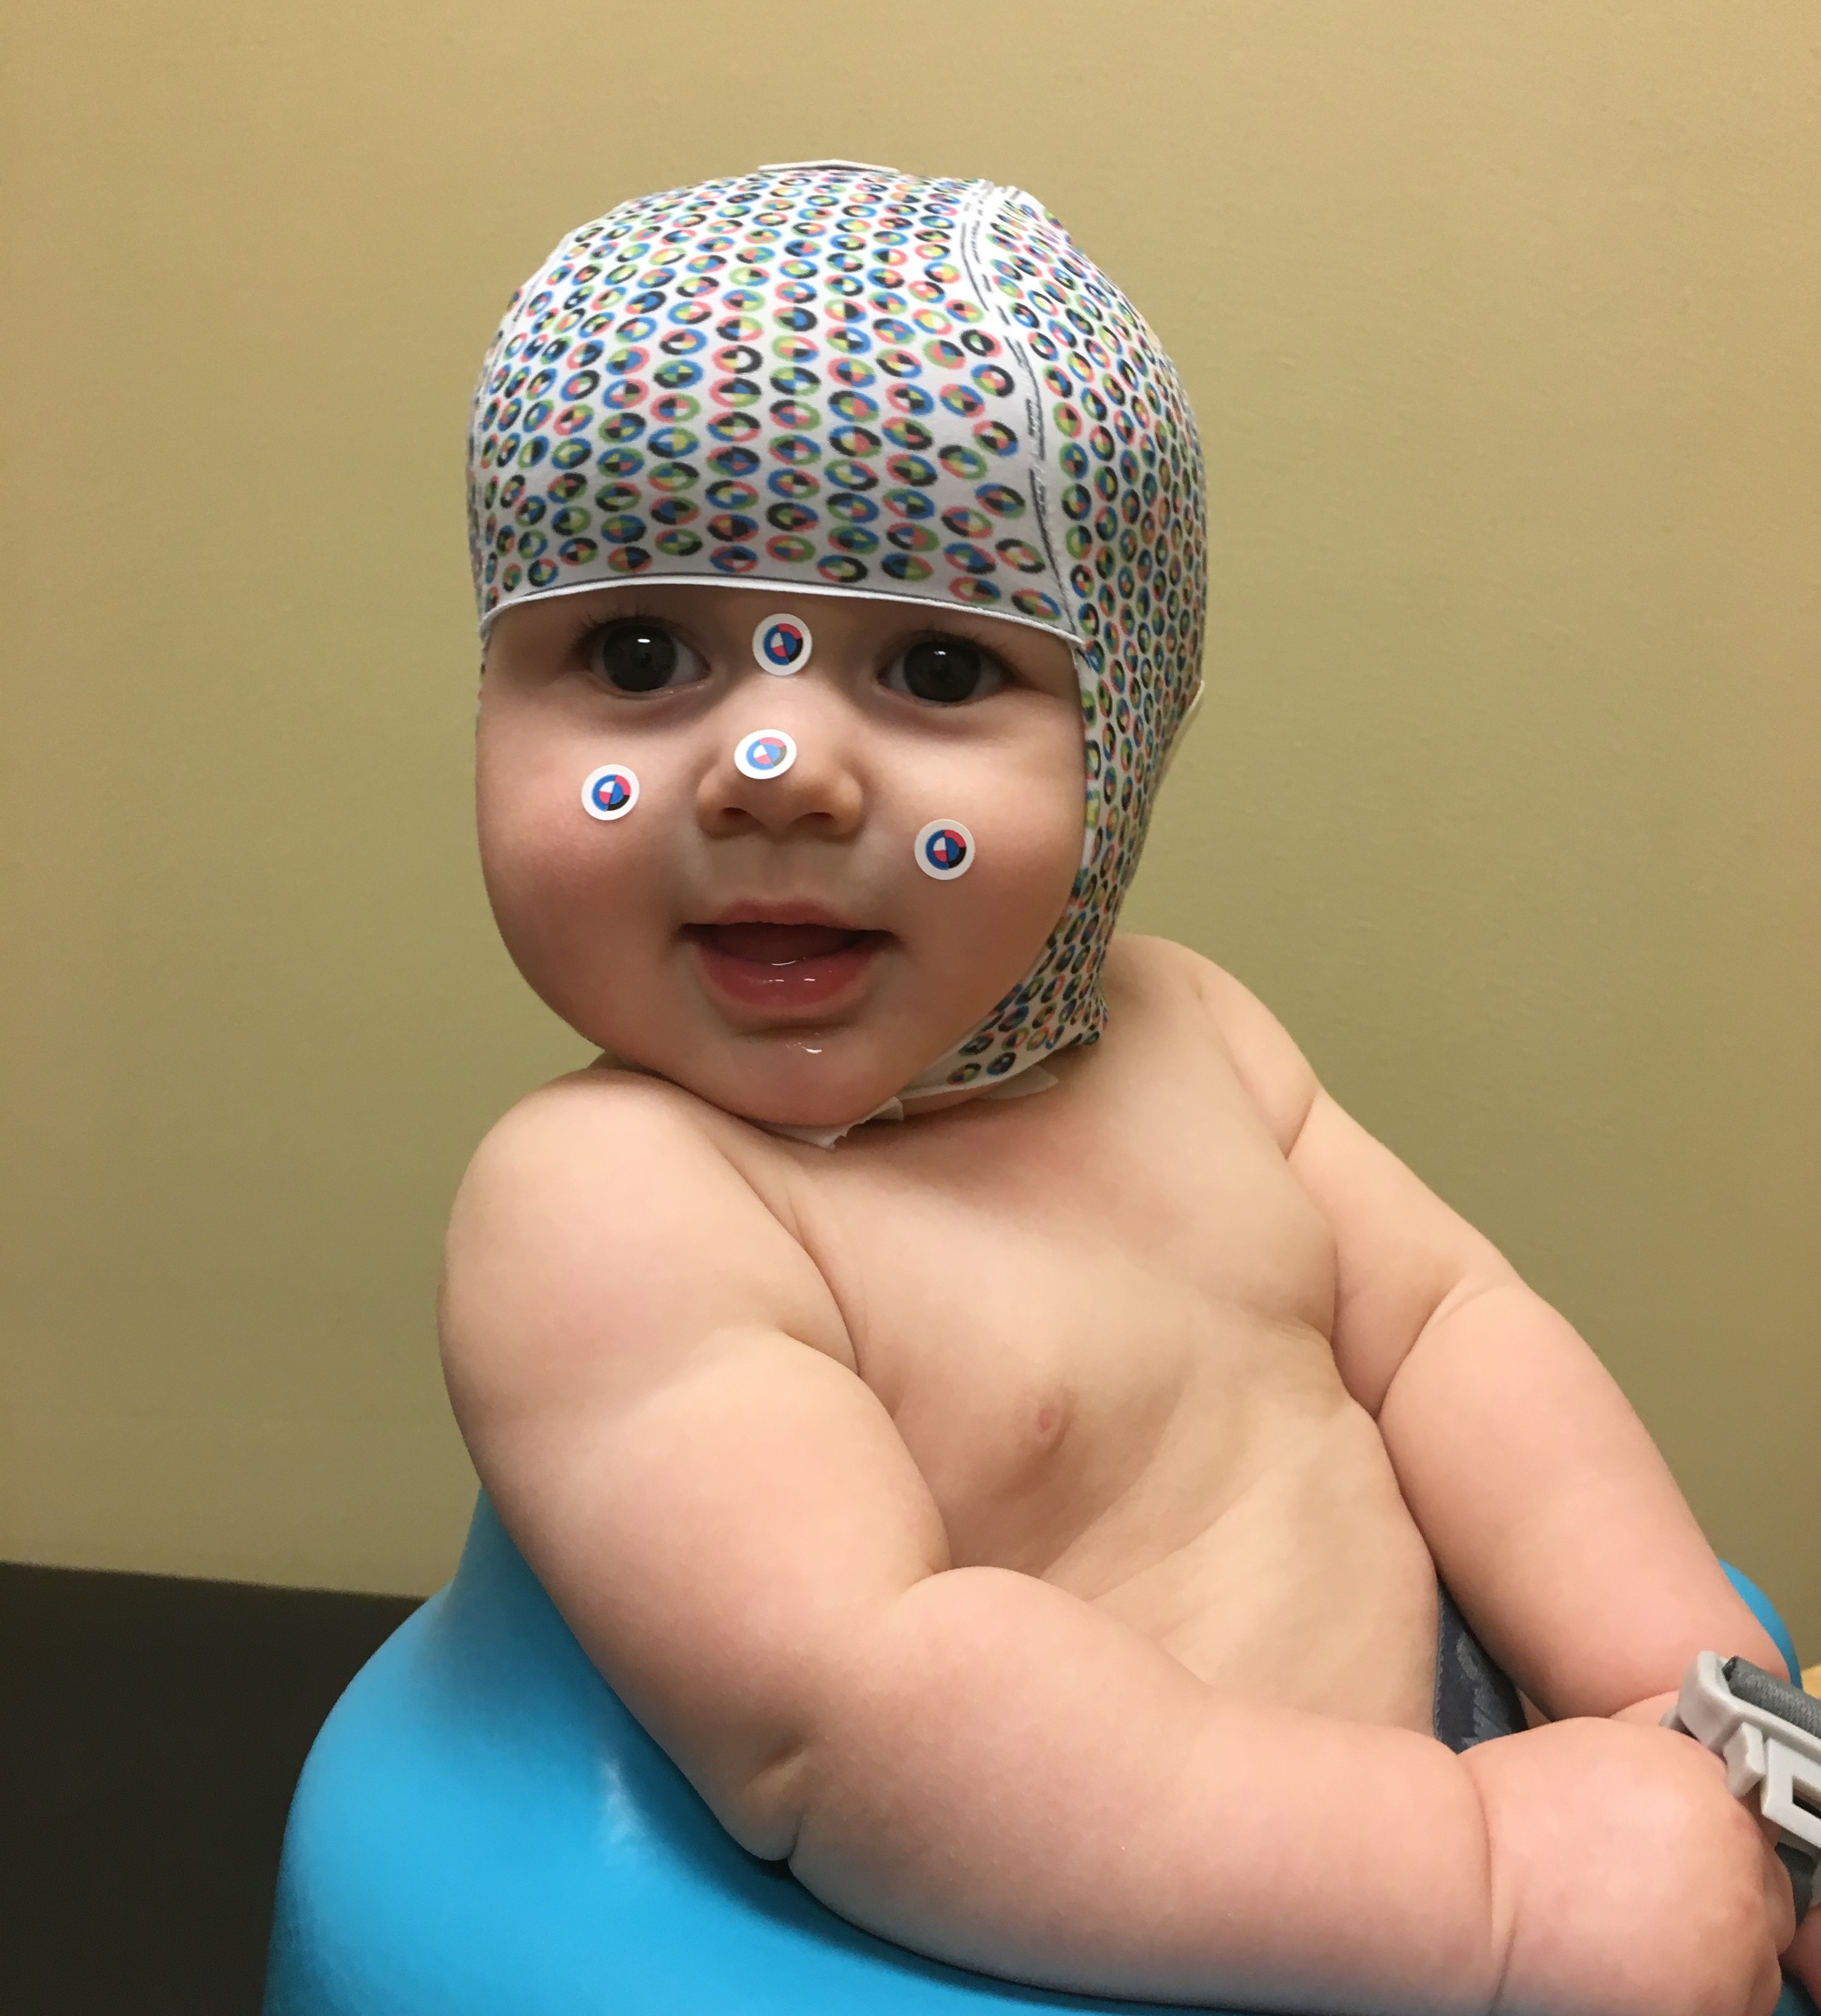 Plagiocephaly and a baby helmet measurement